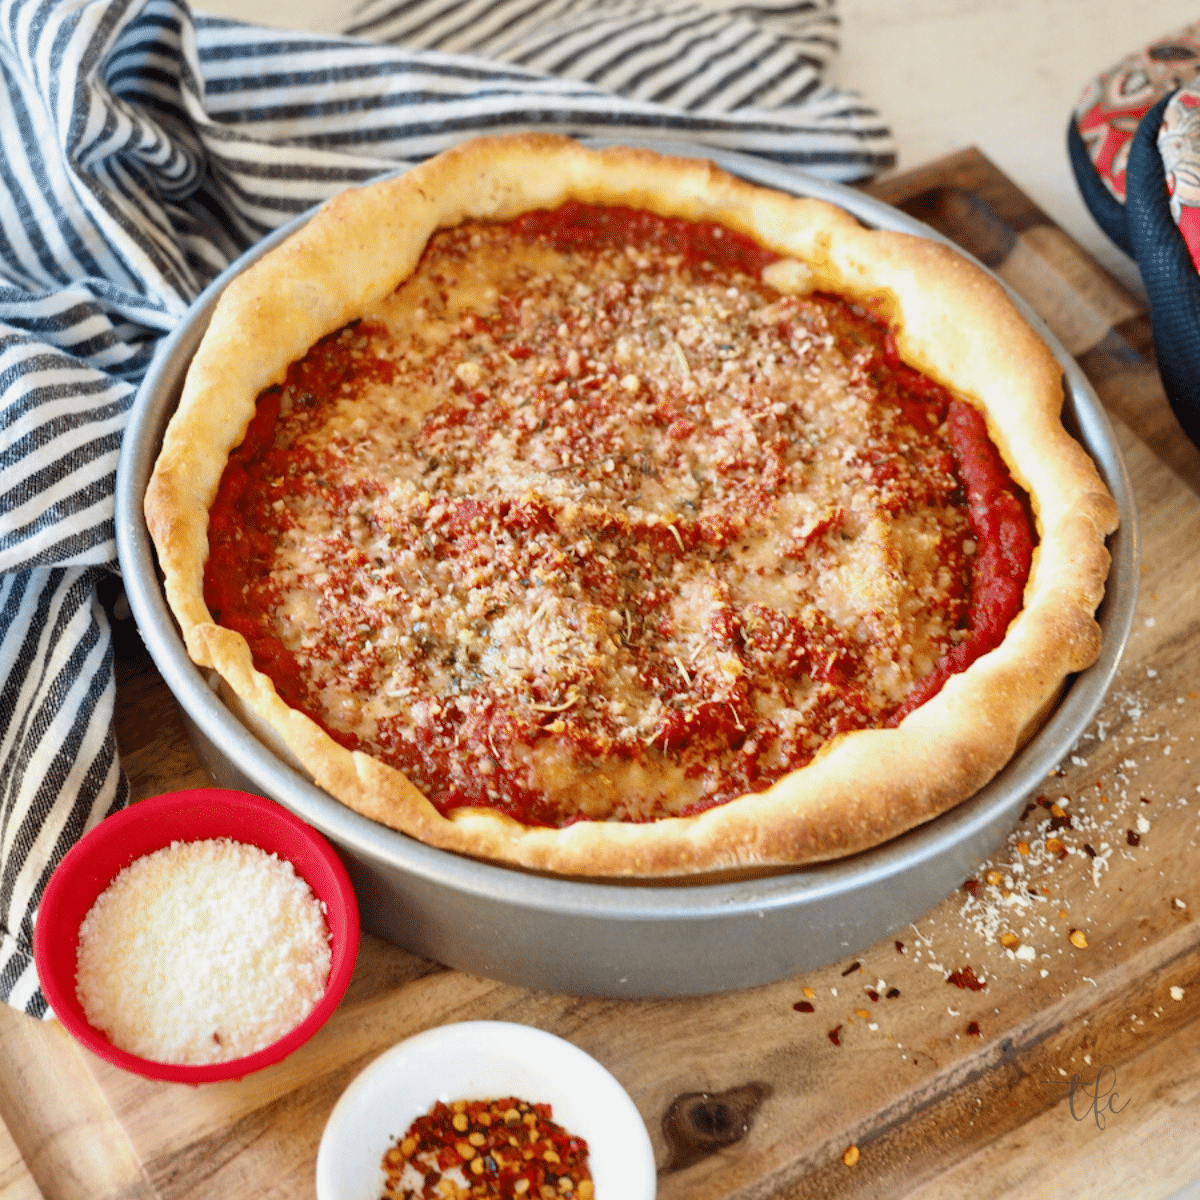 Grilled or Oven Baked Chicago Style Pizza